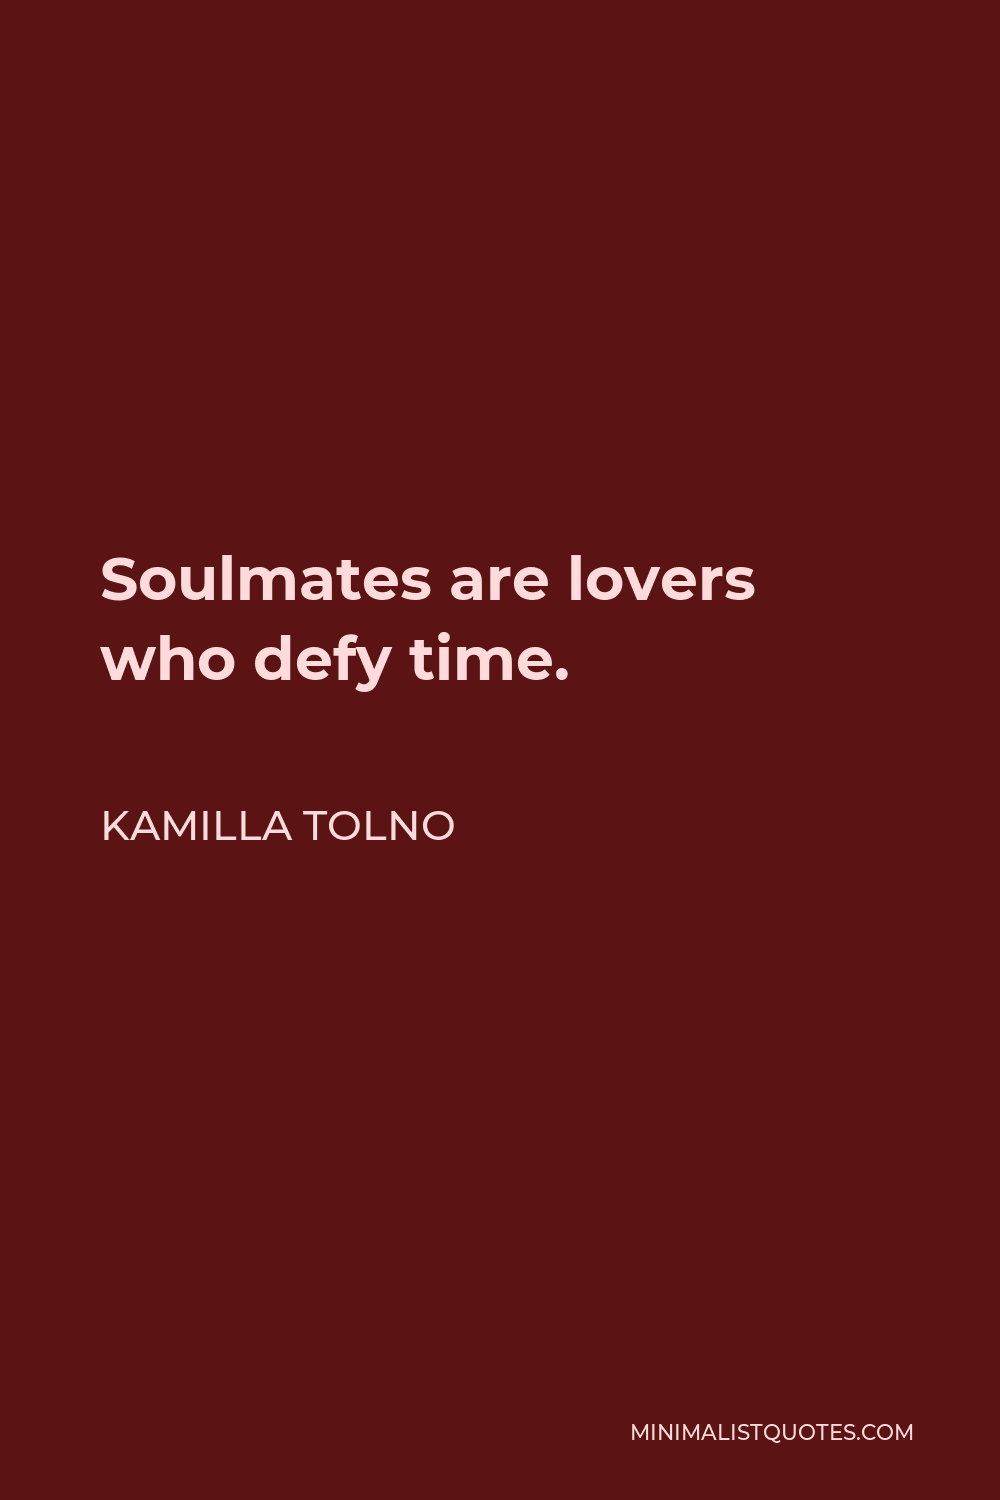 Kamilla Tolno Quote - Soulmates are lovers who defy time.